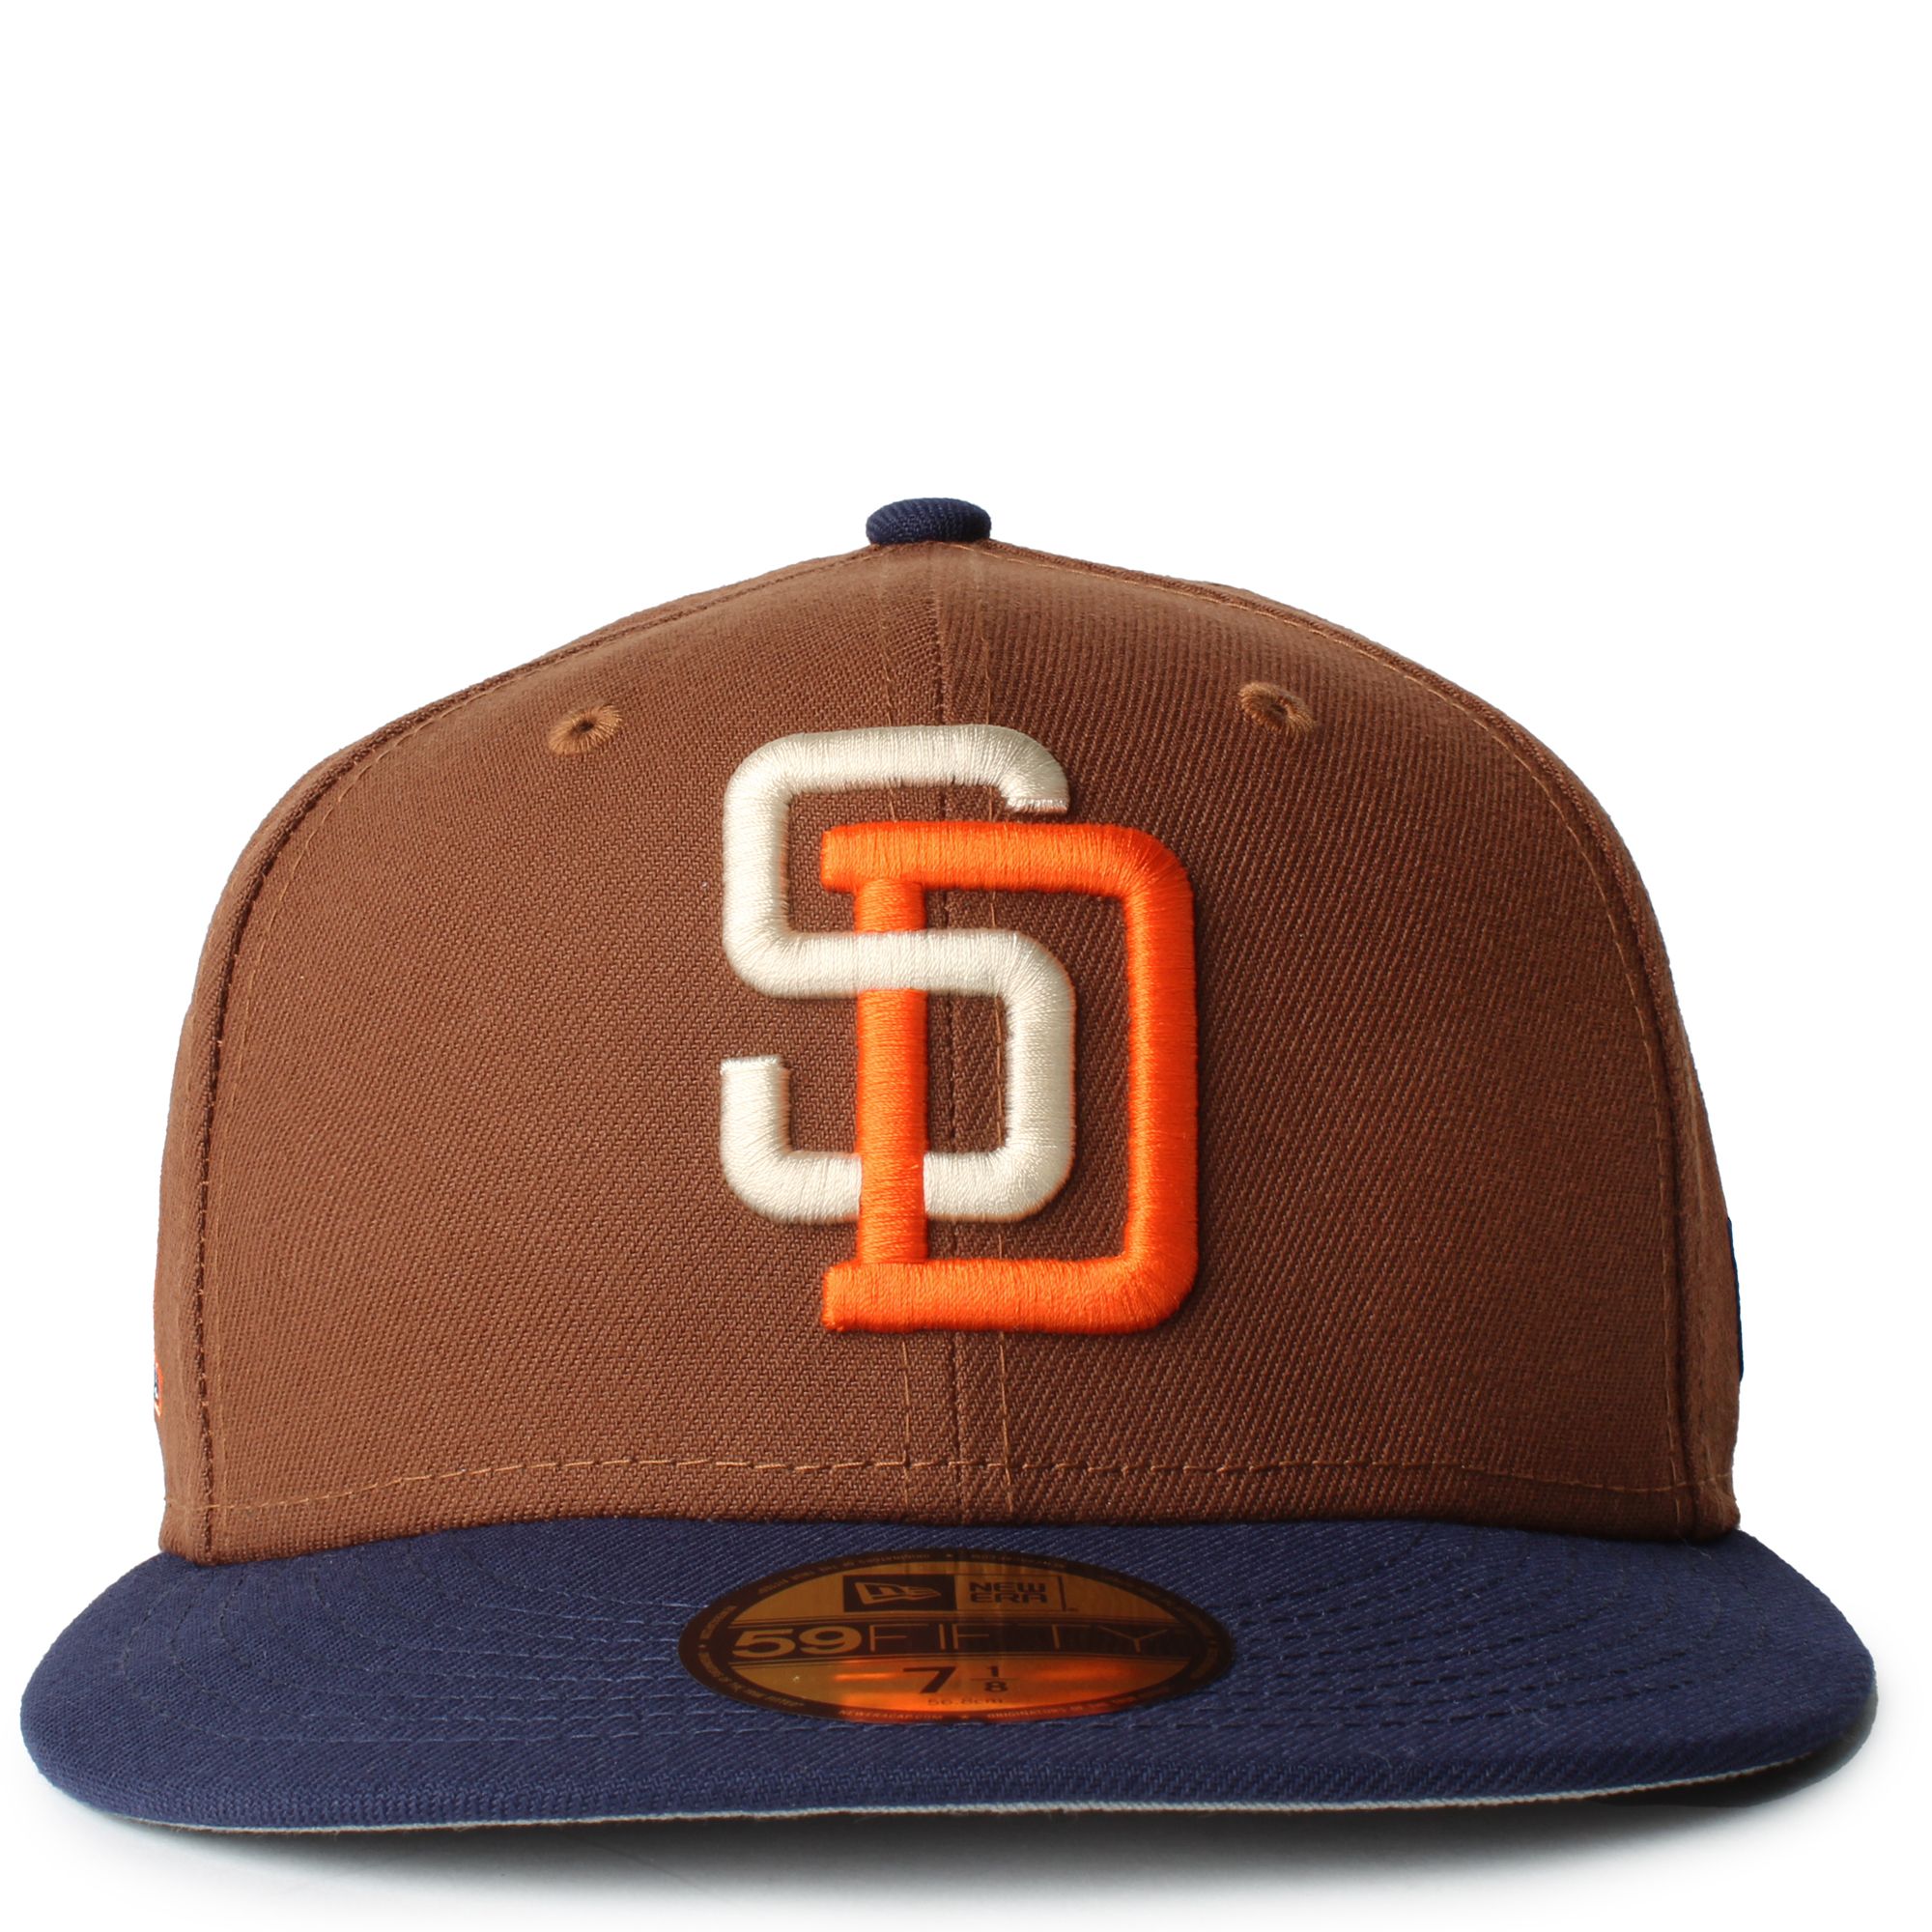 New Era 59FIFTY San Diego Padres Retro City Original Team Colors Fitted Hat